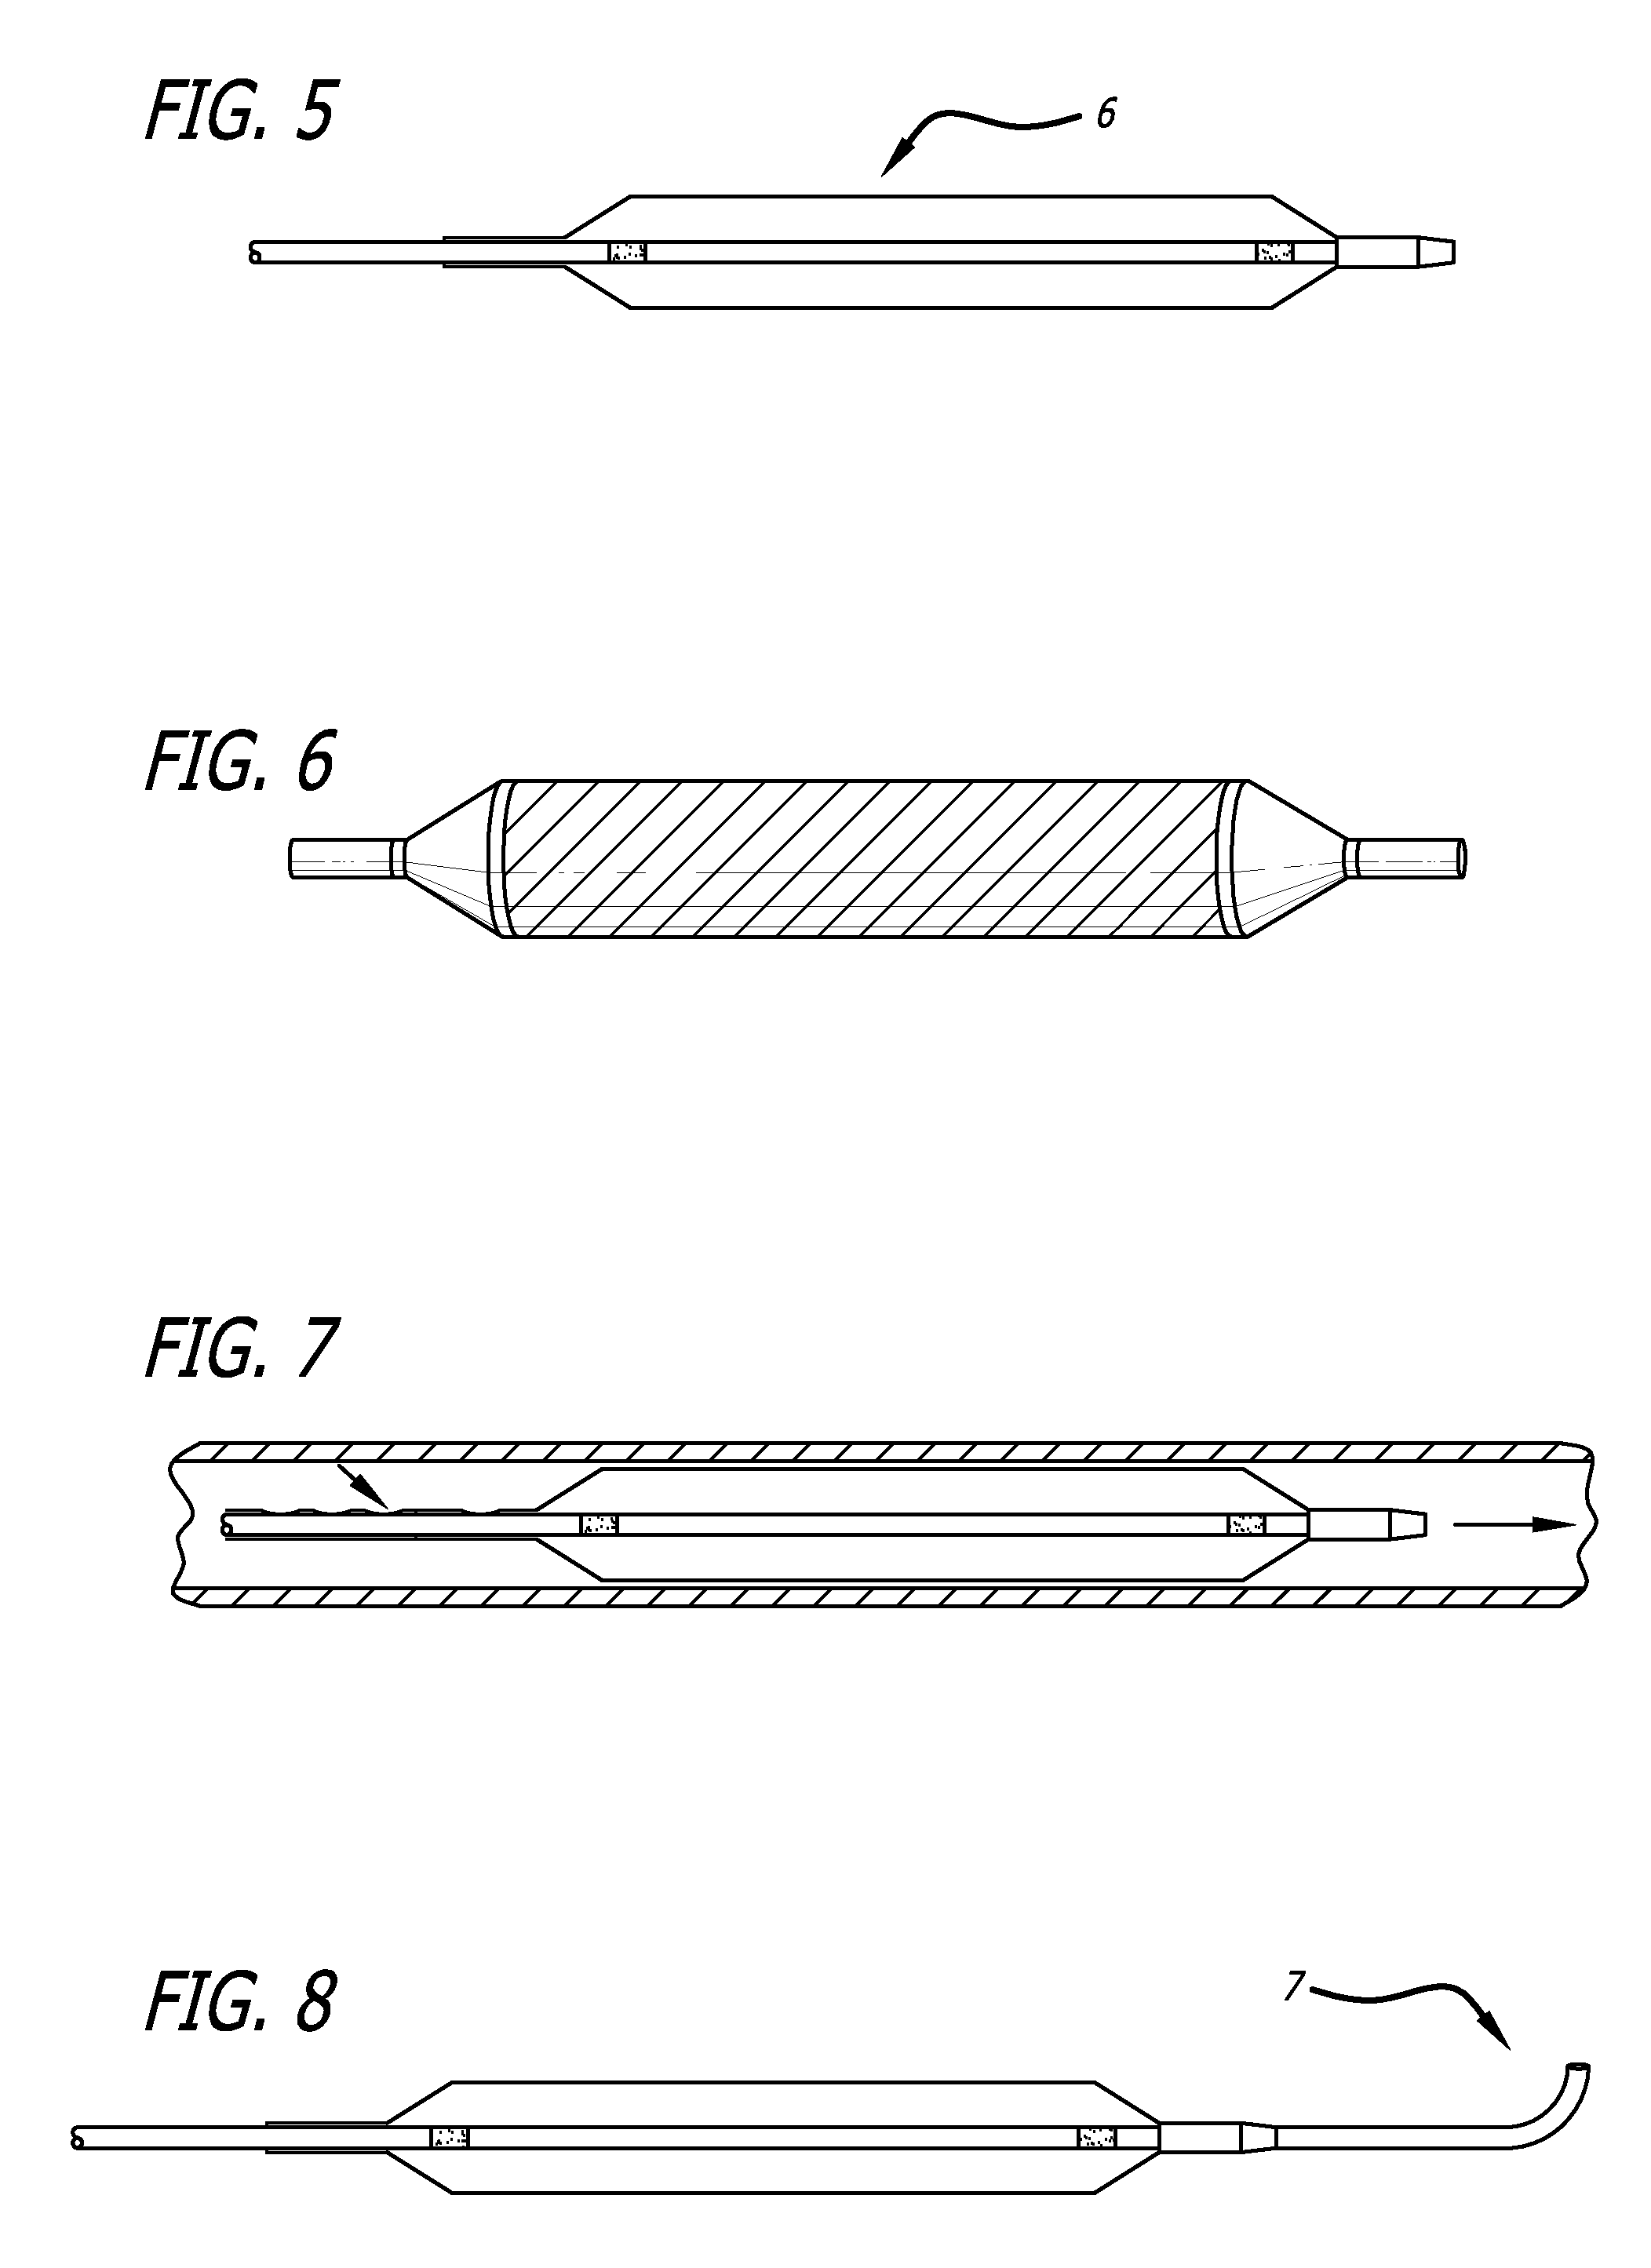 Drug eluting expandable devices